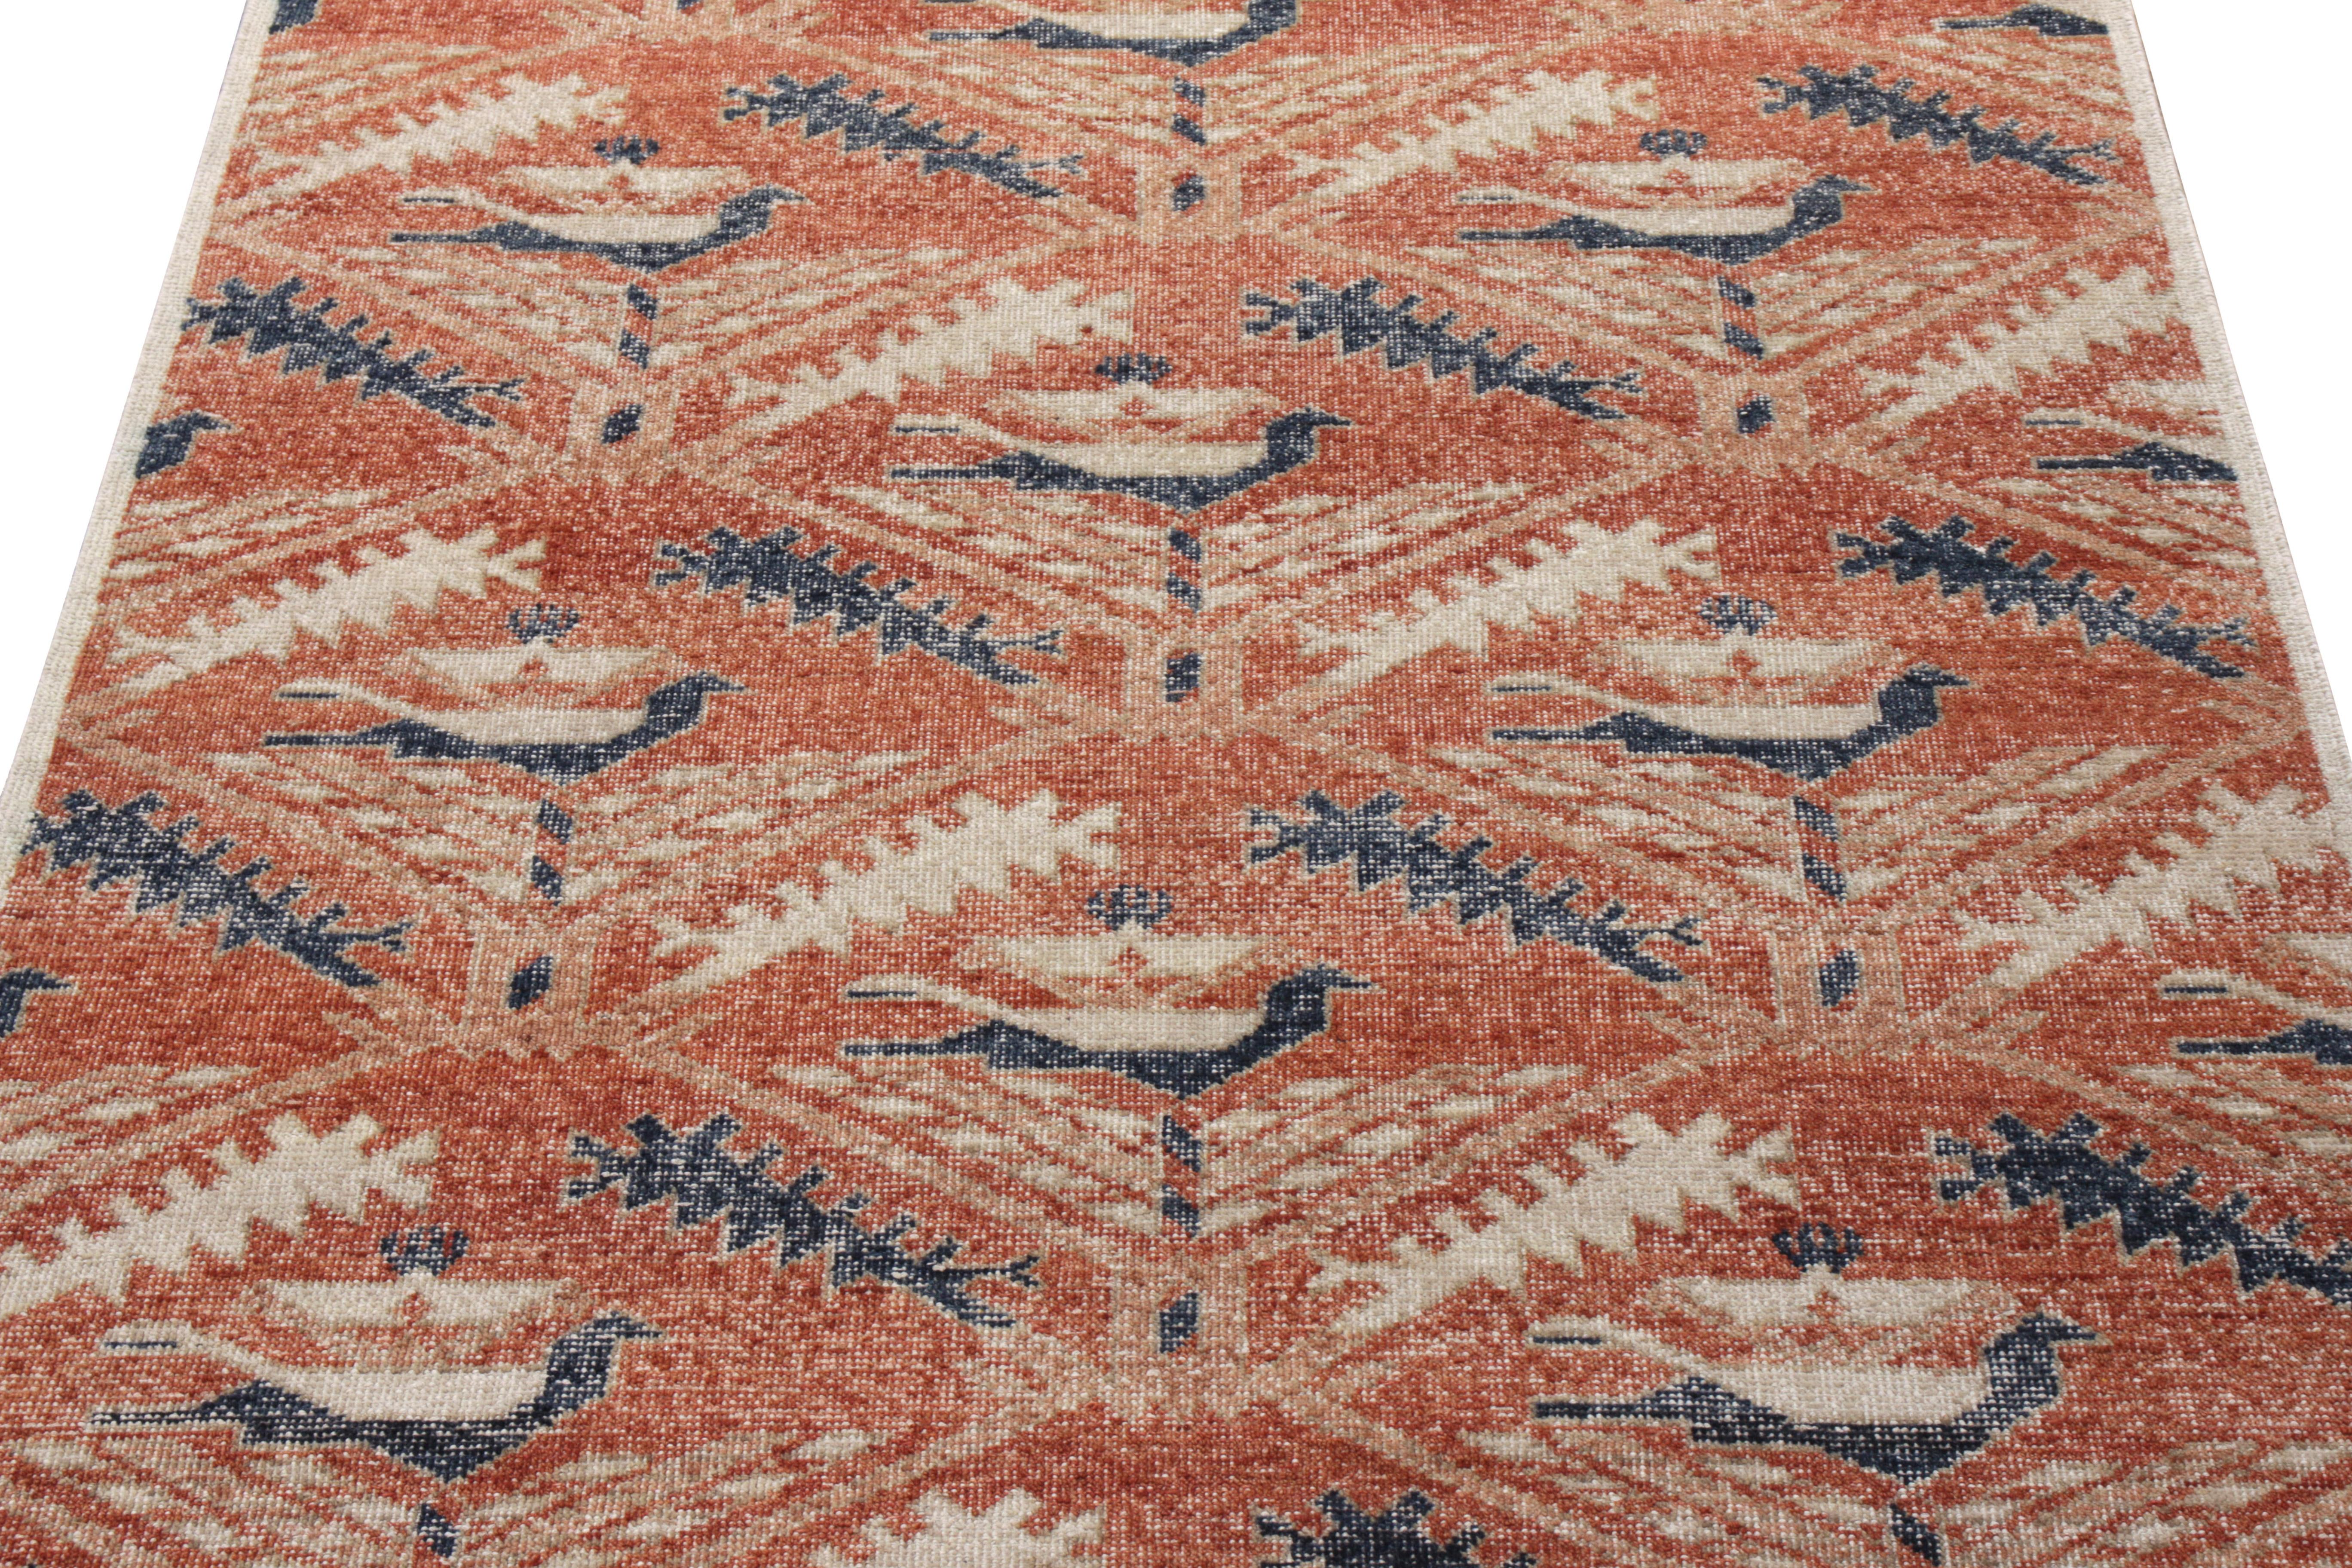 A 5 X 7 example of a hand-knotted wool custom rug from Rug & Kilim’s Homage Collection. This tribal-inspired piece enjoys a symmetric geometric pattern that lends a unique pagination to this textural, distressed style. The employment of gorgeous